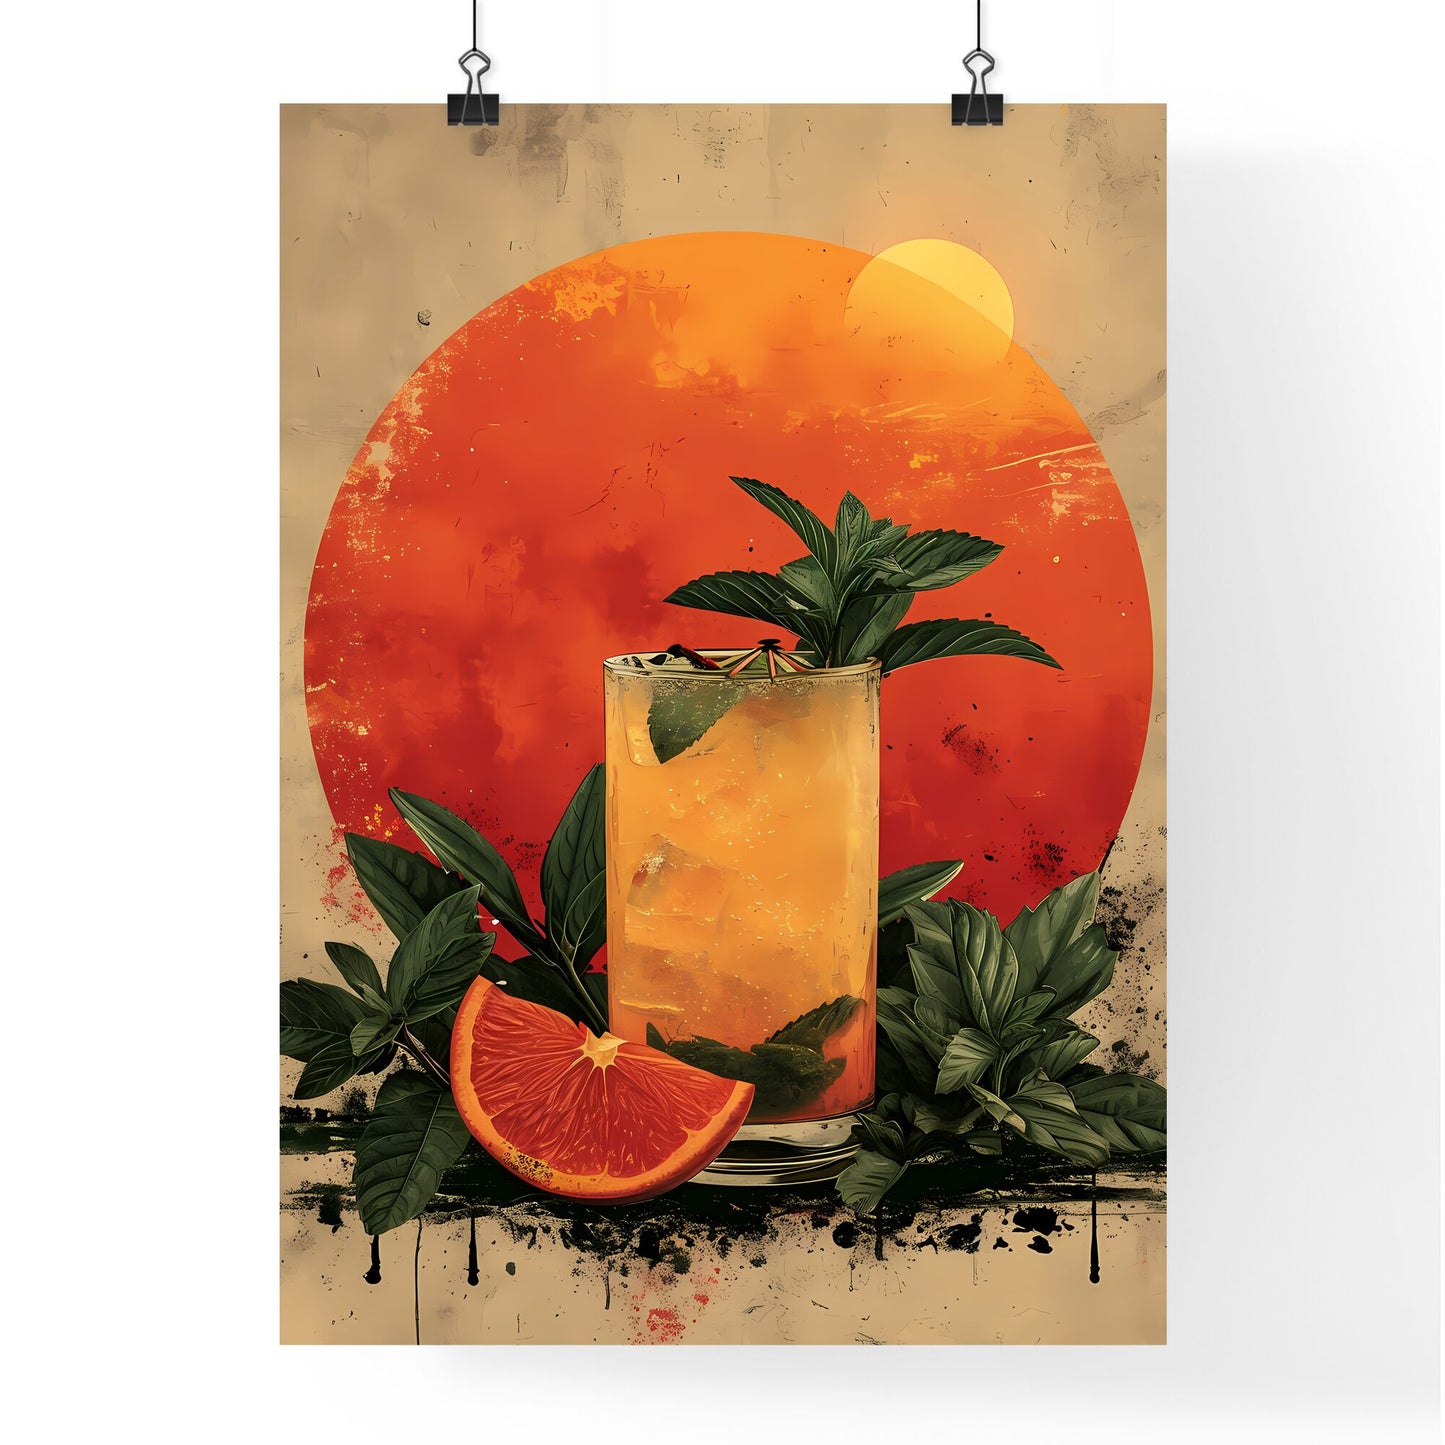 A fruity cocktail radiates hues of yellow - Art print of a glass of orange juice with leaves and orange slice Default Title